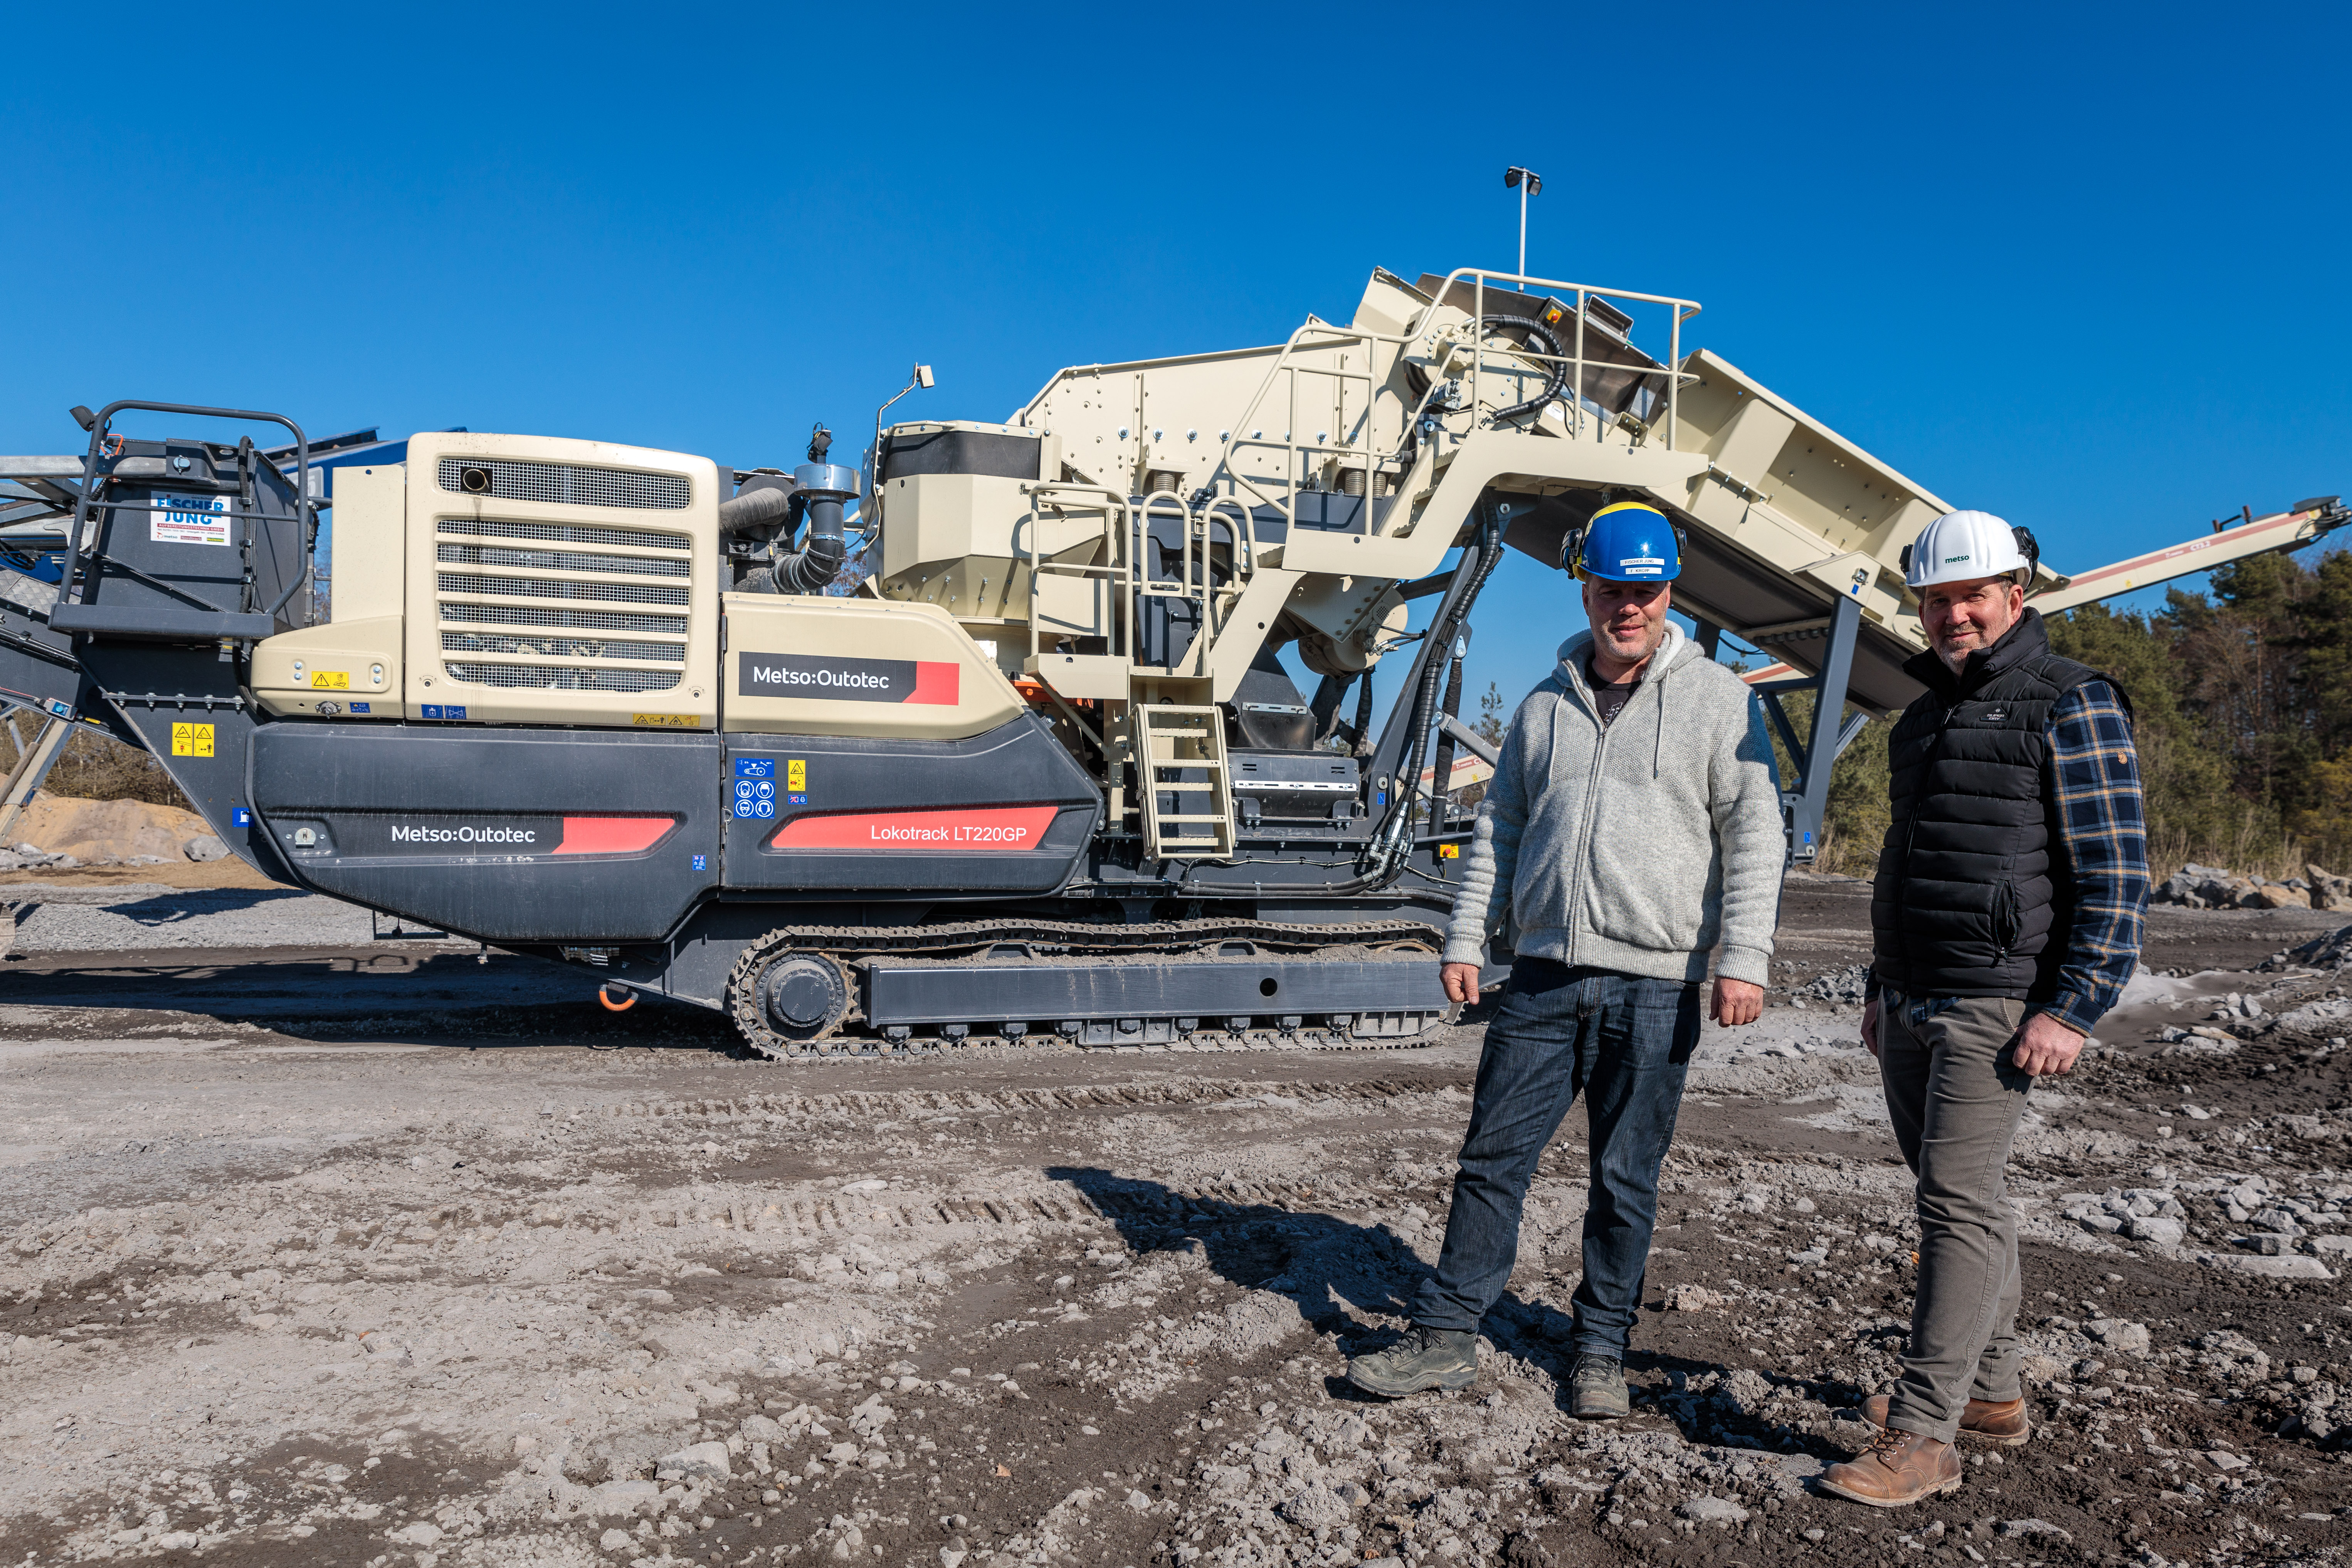 Satisfied with the commissioning: Karl-Werner Bierbrauer (Managing Director of Bierbrauer & Sohn GmbH / Terratec-Basalt GmbH) and Ralph Phlippen (Managing Director of Fischer-Jung Aufbereitungstechnik GmbH) in front of Europe's first Lokotrack® LT220GP™ mobile cone crusher from Metso Outotec at the quarry in Ettringen. 